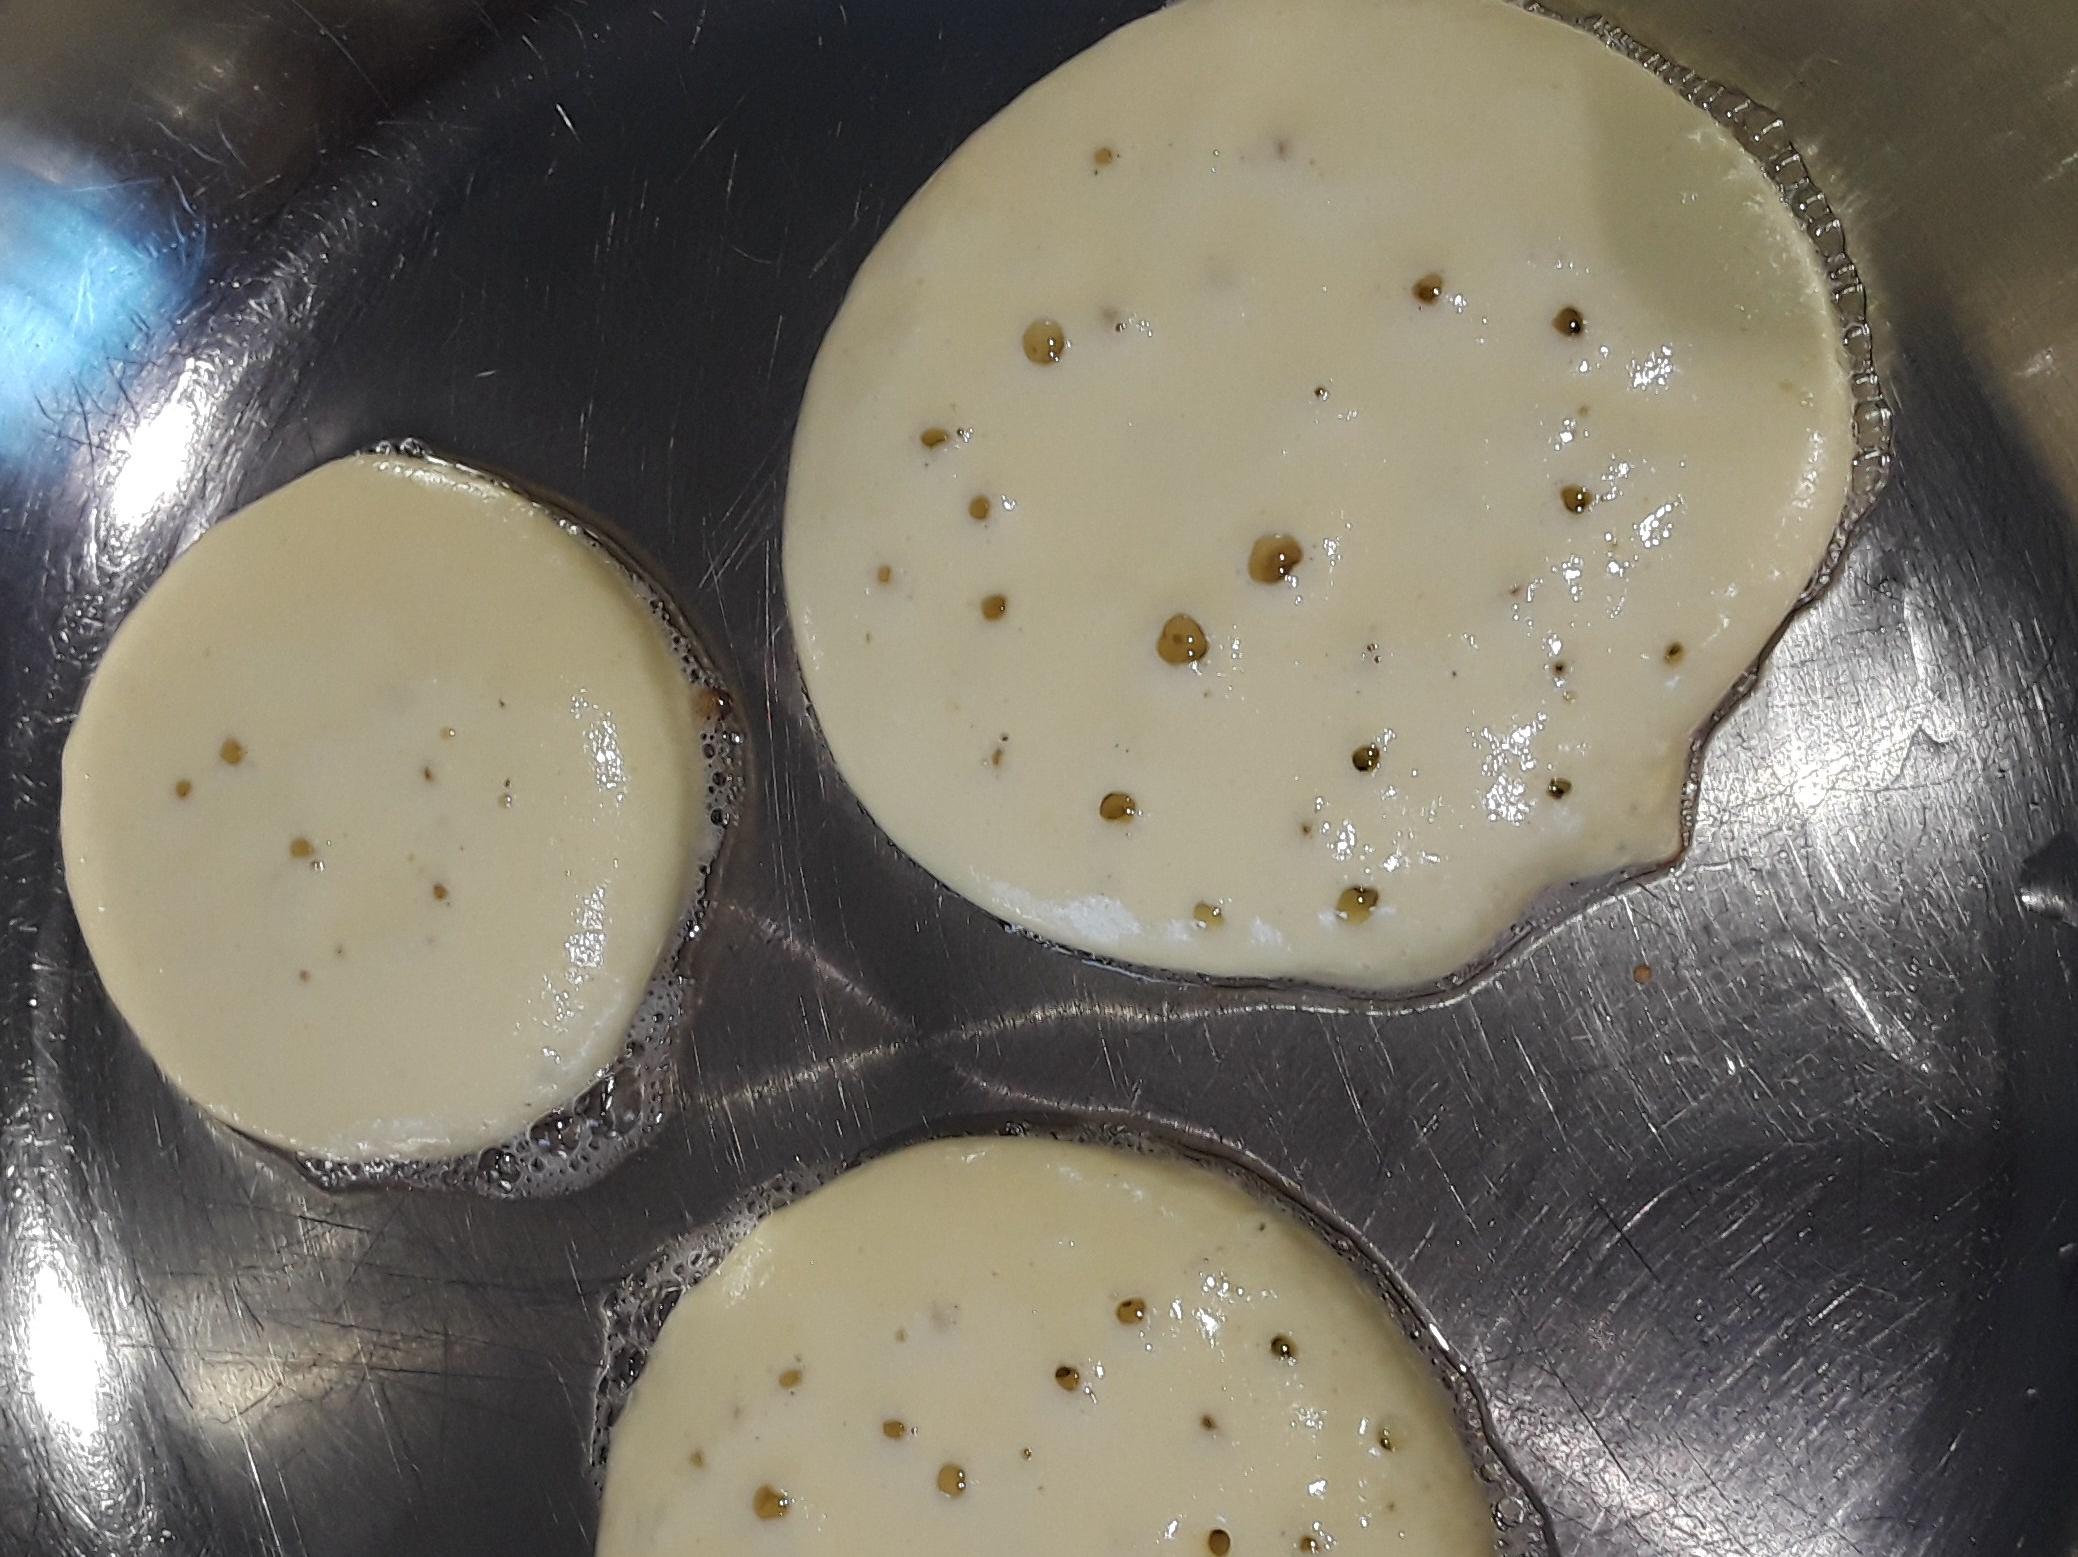 Pancakes frying on one side with small air bubbles forming on surface